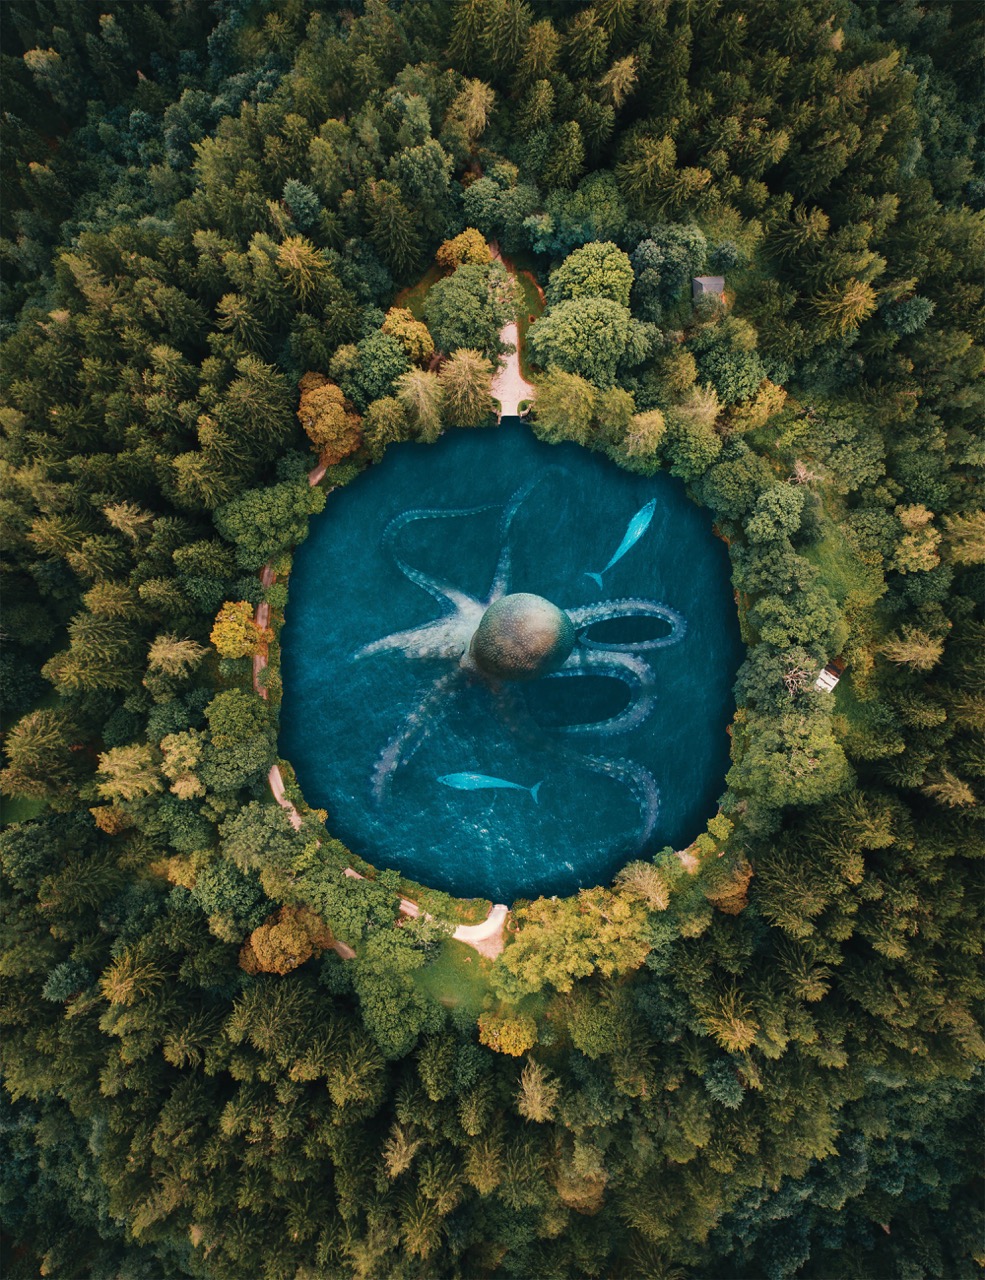 octopus_swimming_surrounded_by_trees_AbdelrahmanElbadry